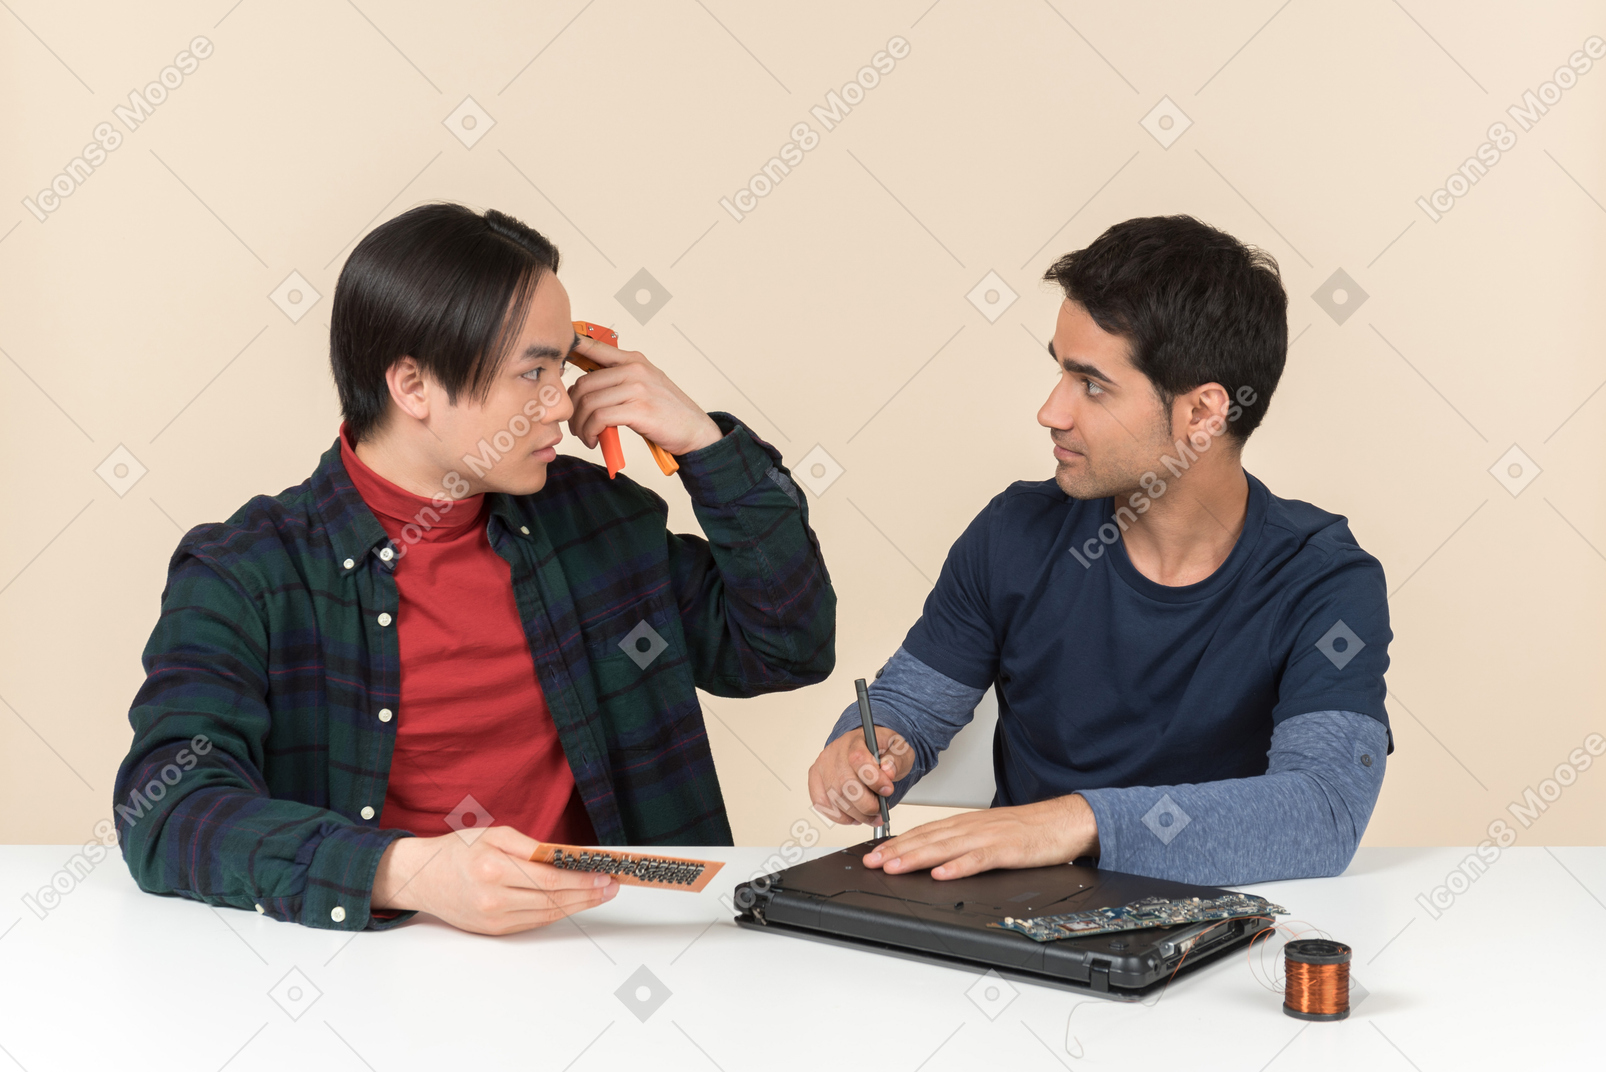 Two young geeks sitting at the table and having issues with fixing the laptop